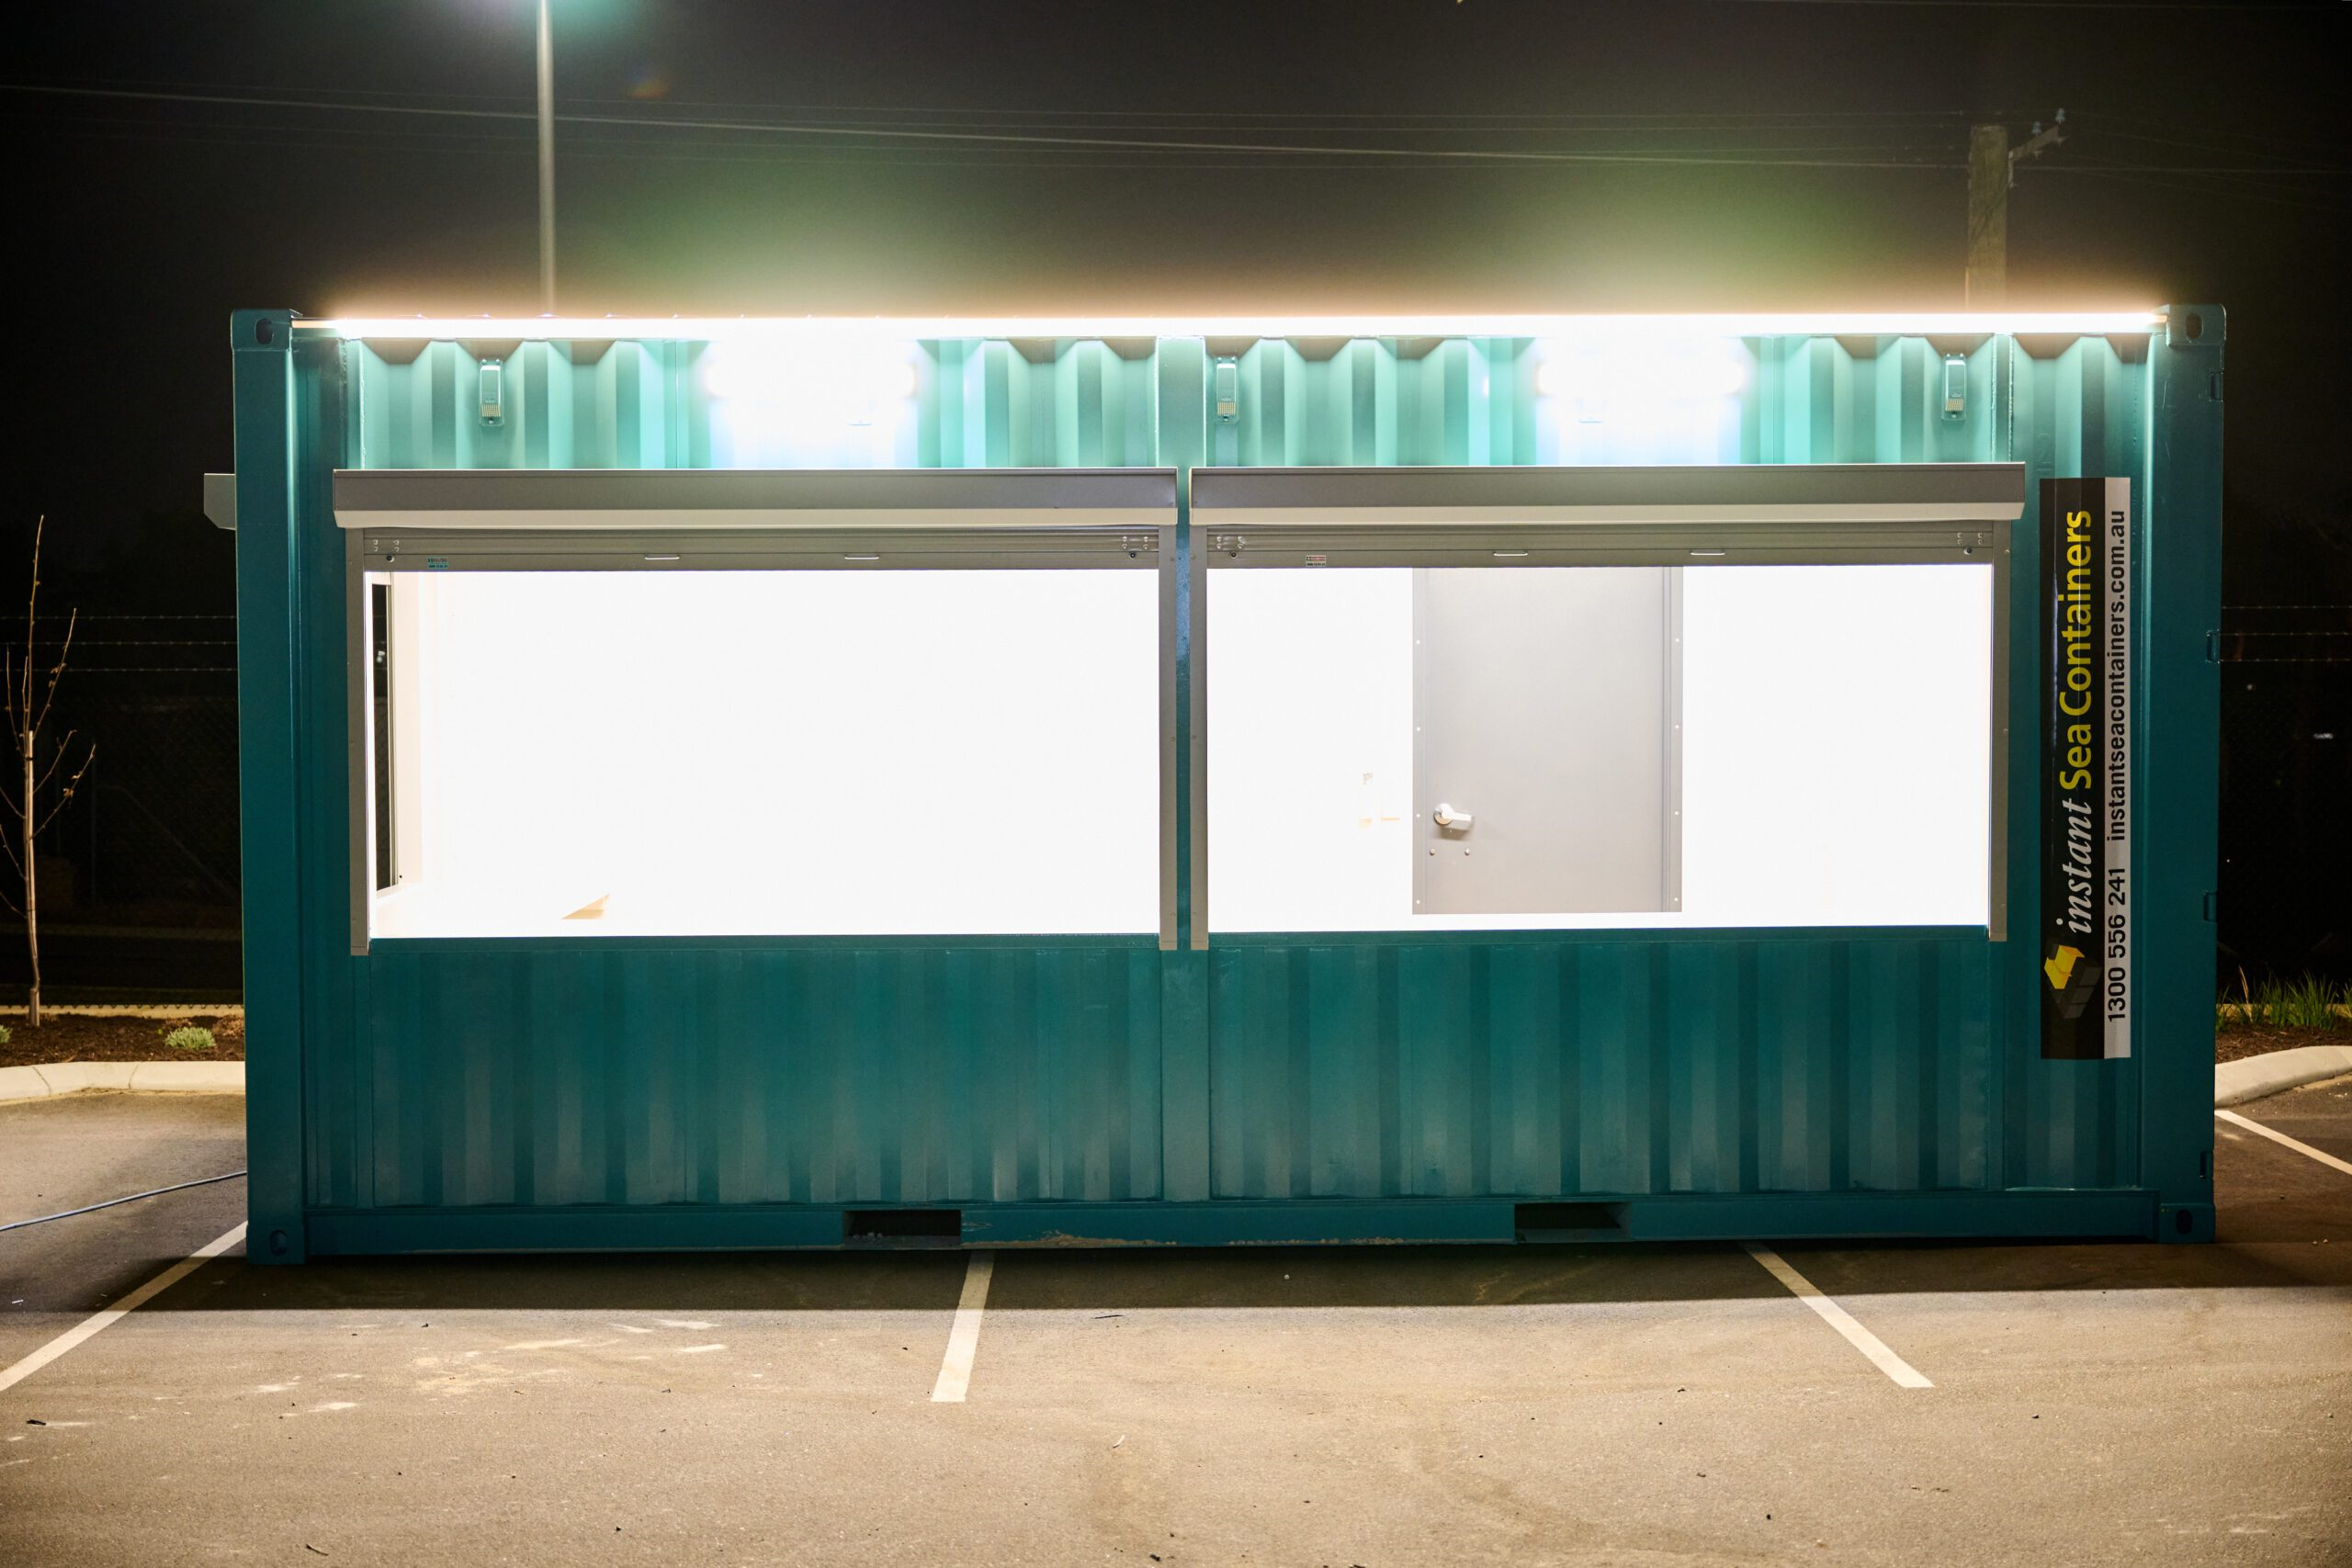 a teal shipping container at night, equipped with large display windows and external lighting.